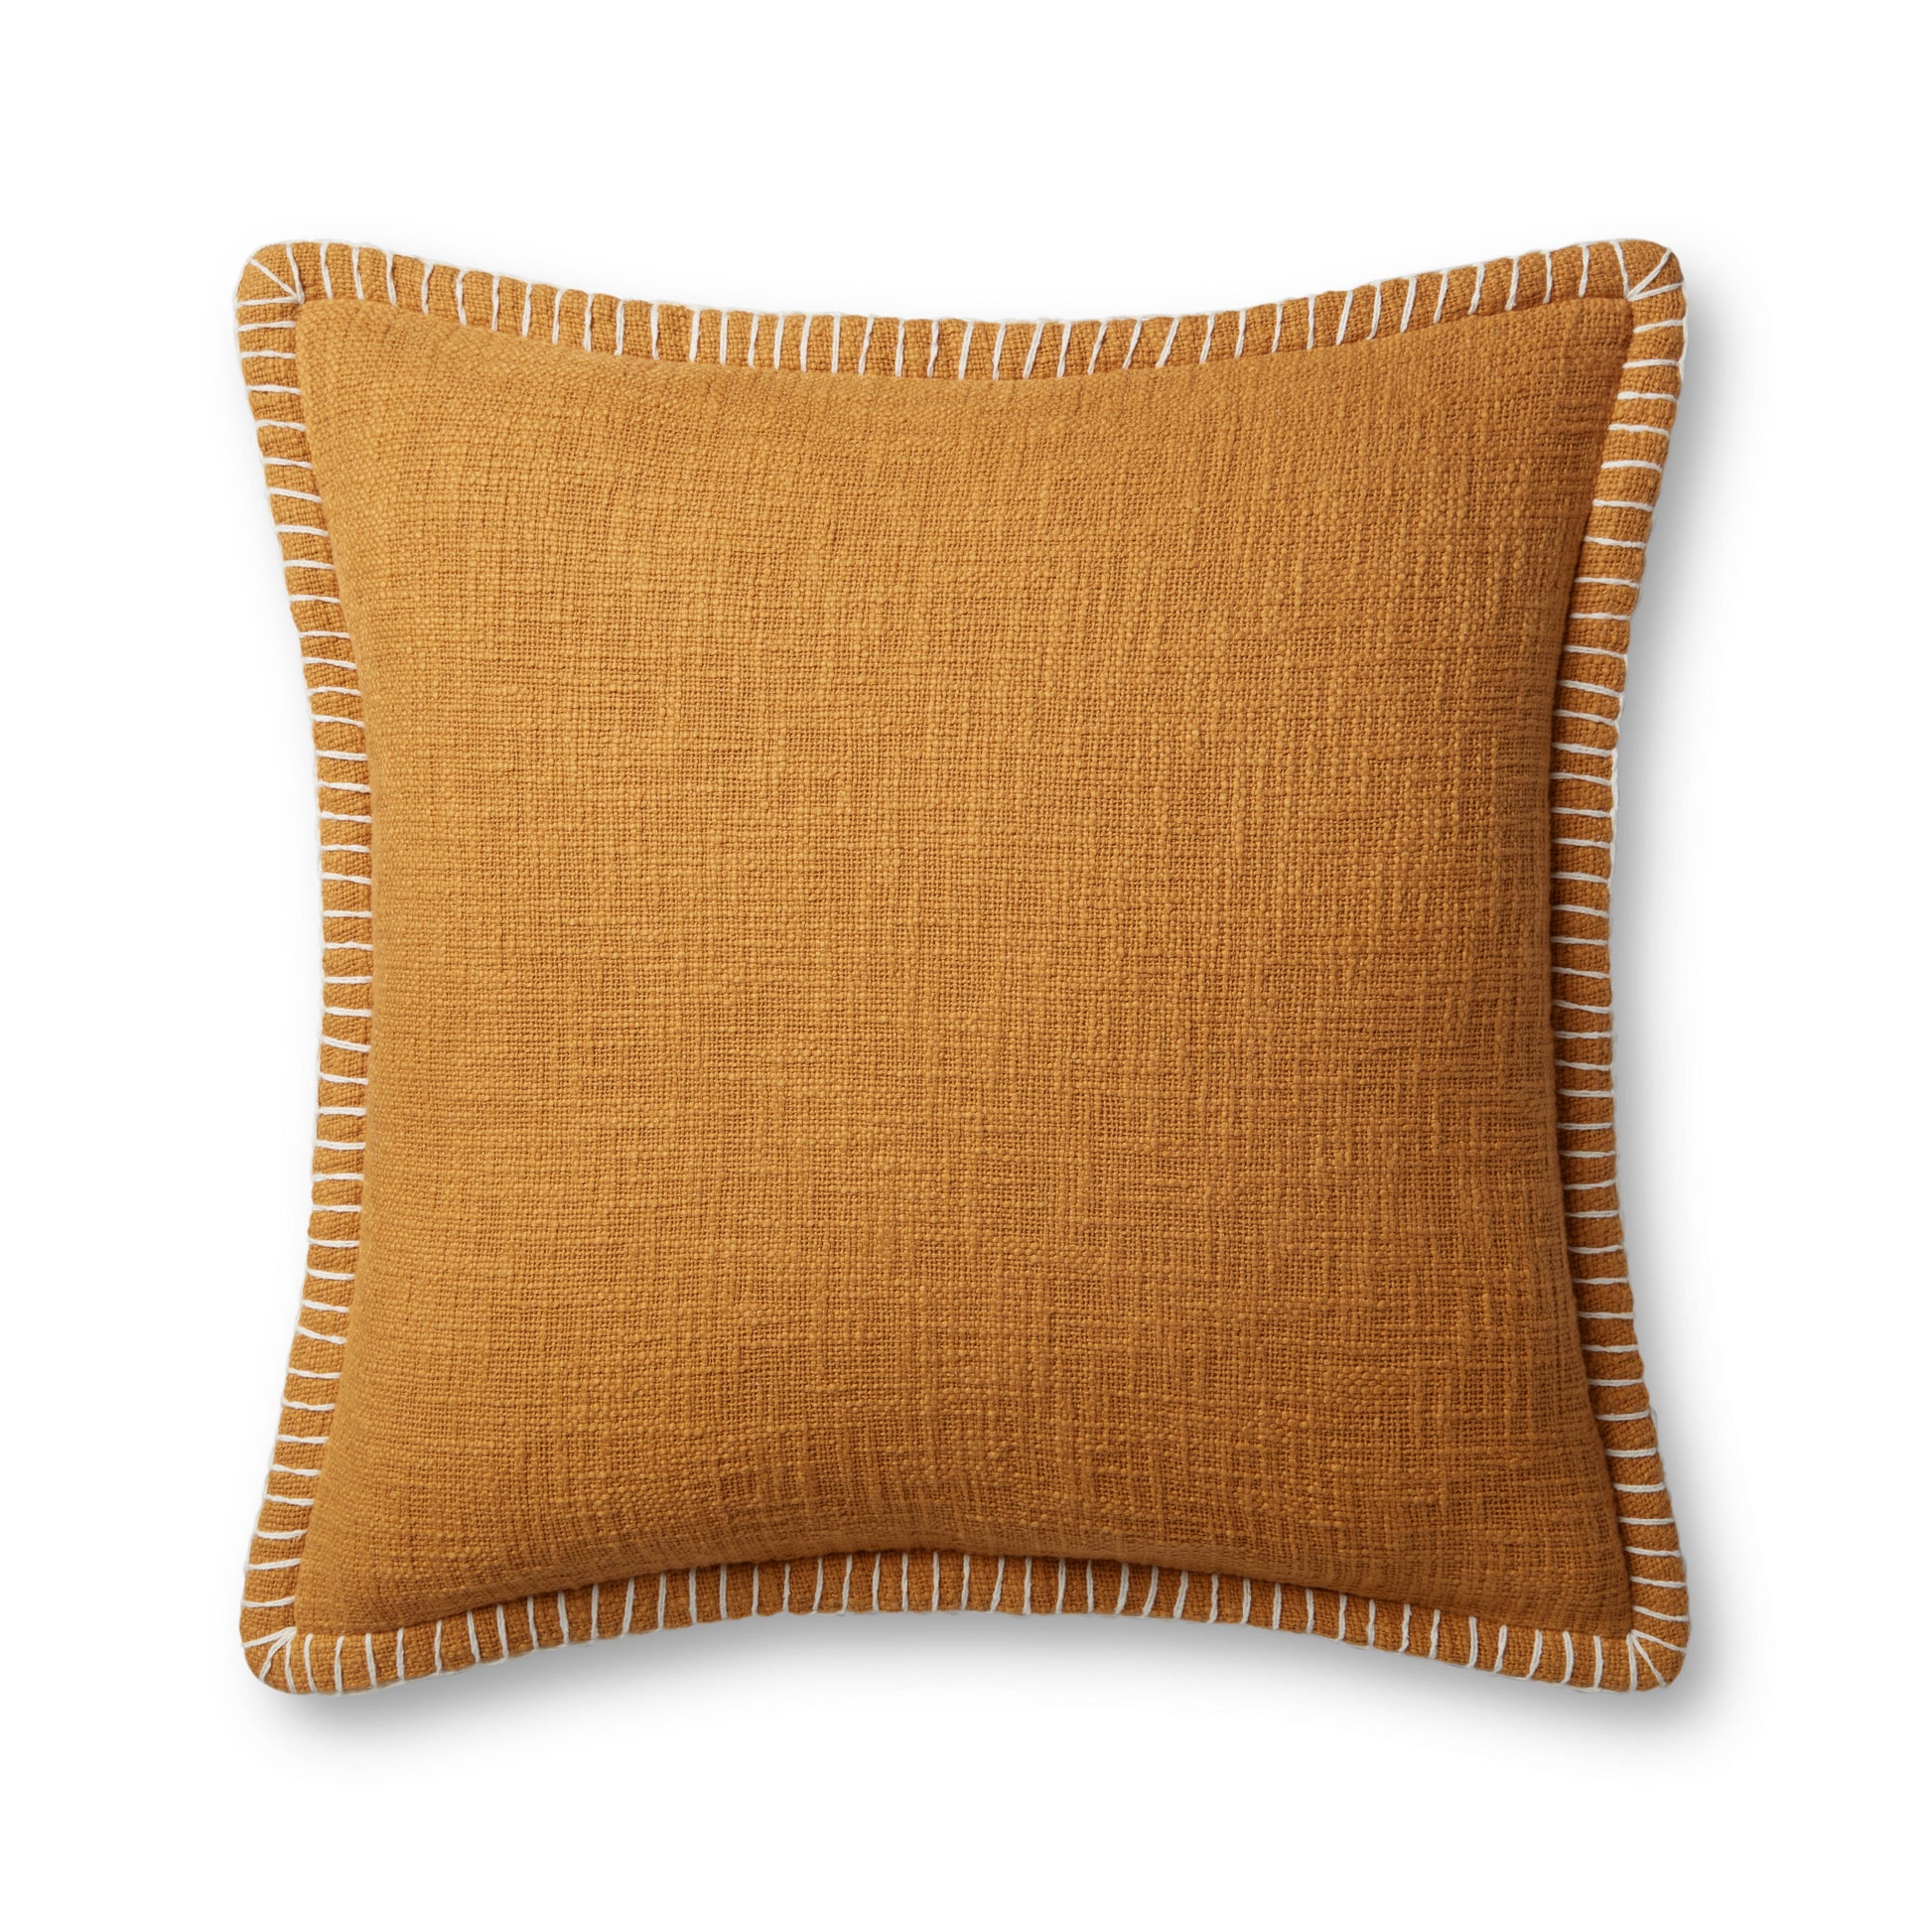 Photo of a pillow;  PLL0109 Gold 22'' x 22'' Cover w/Poly Pillow